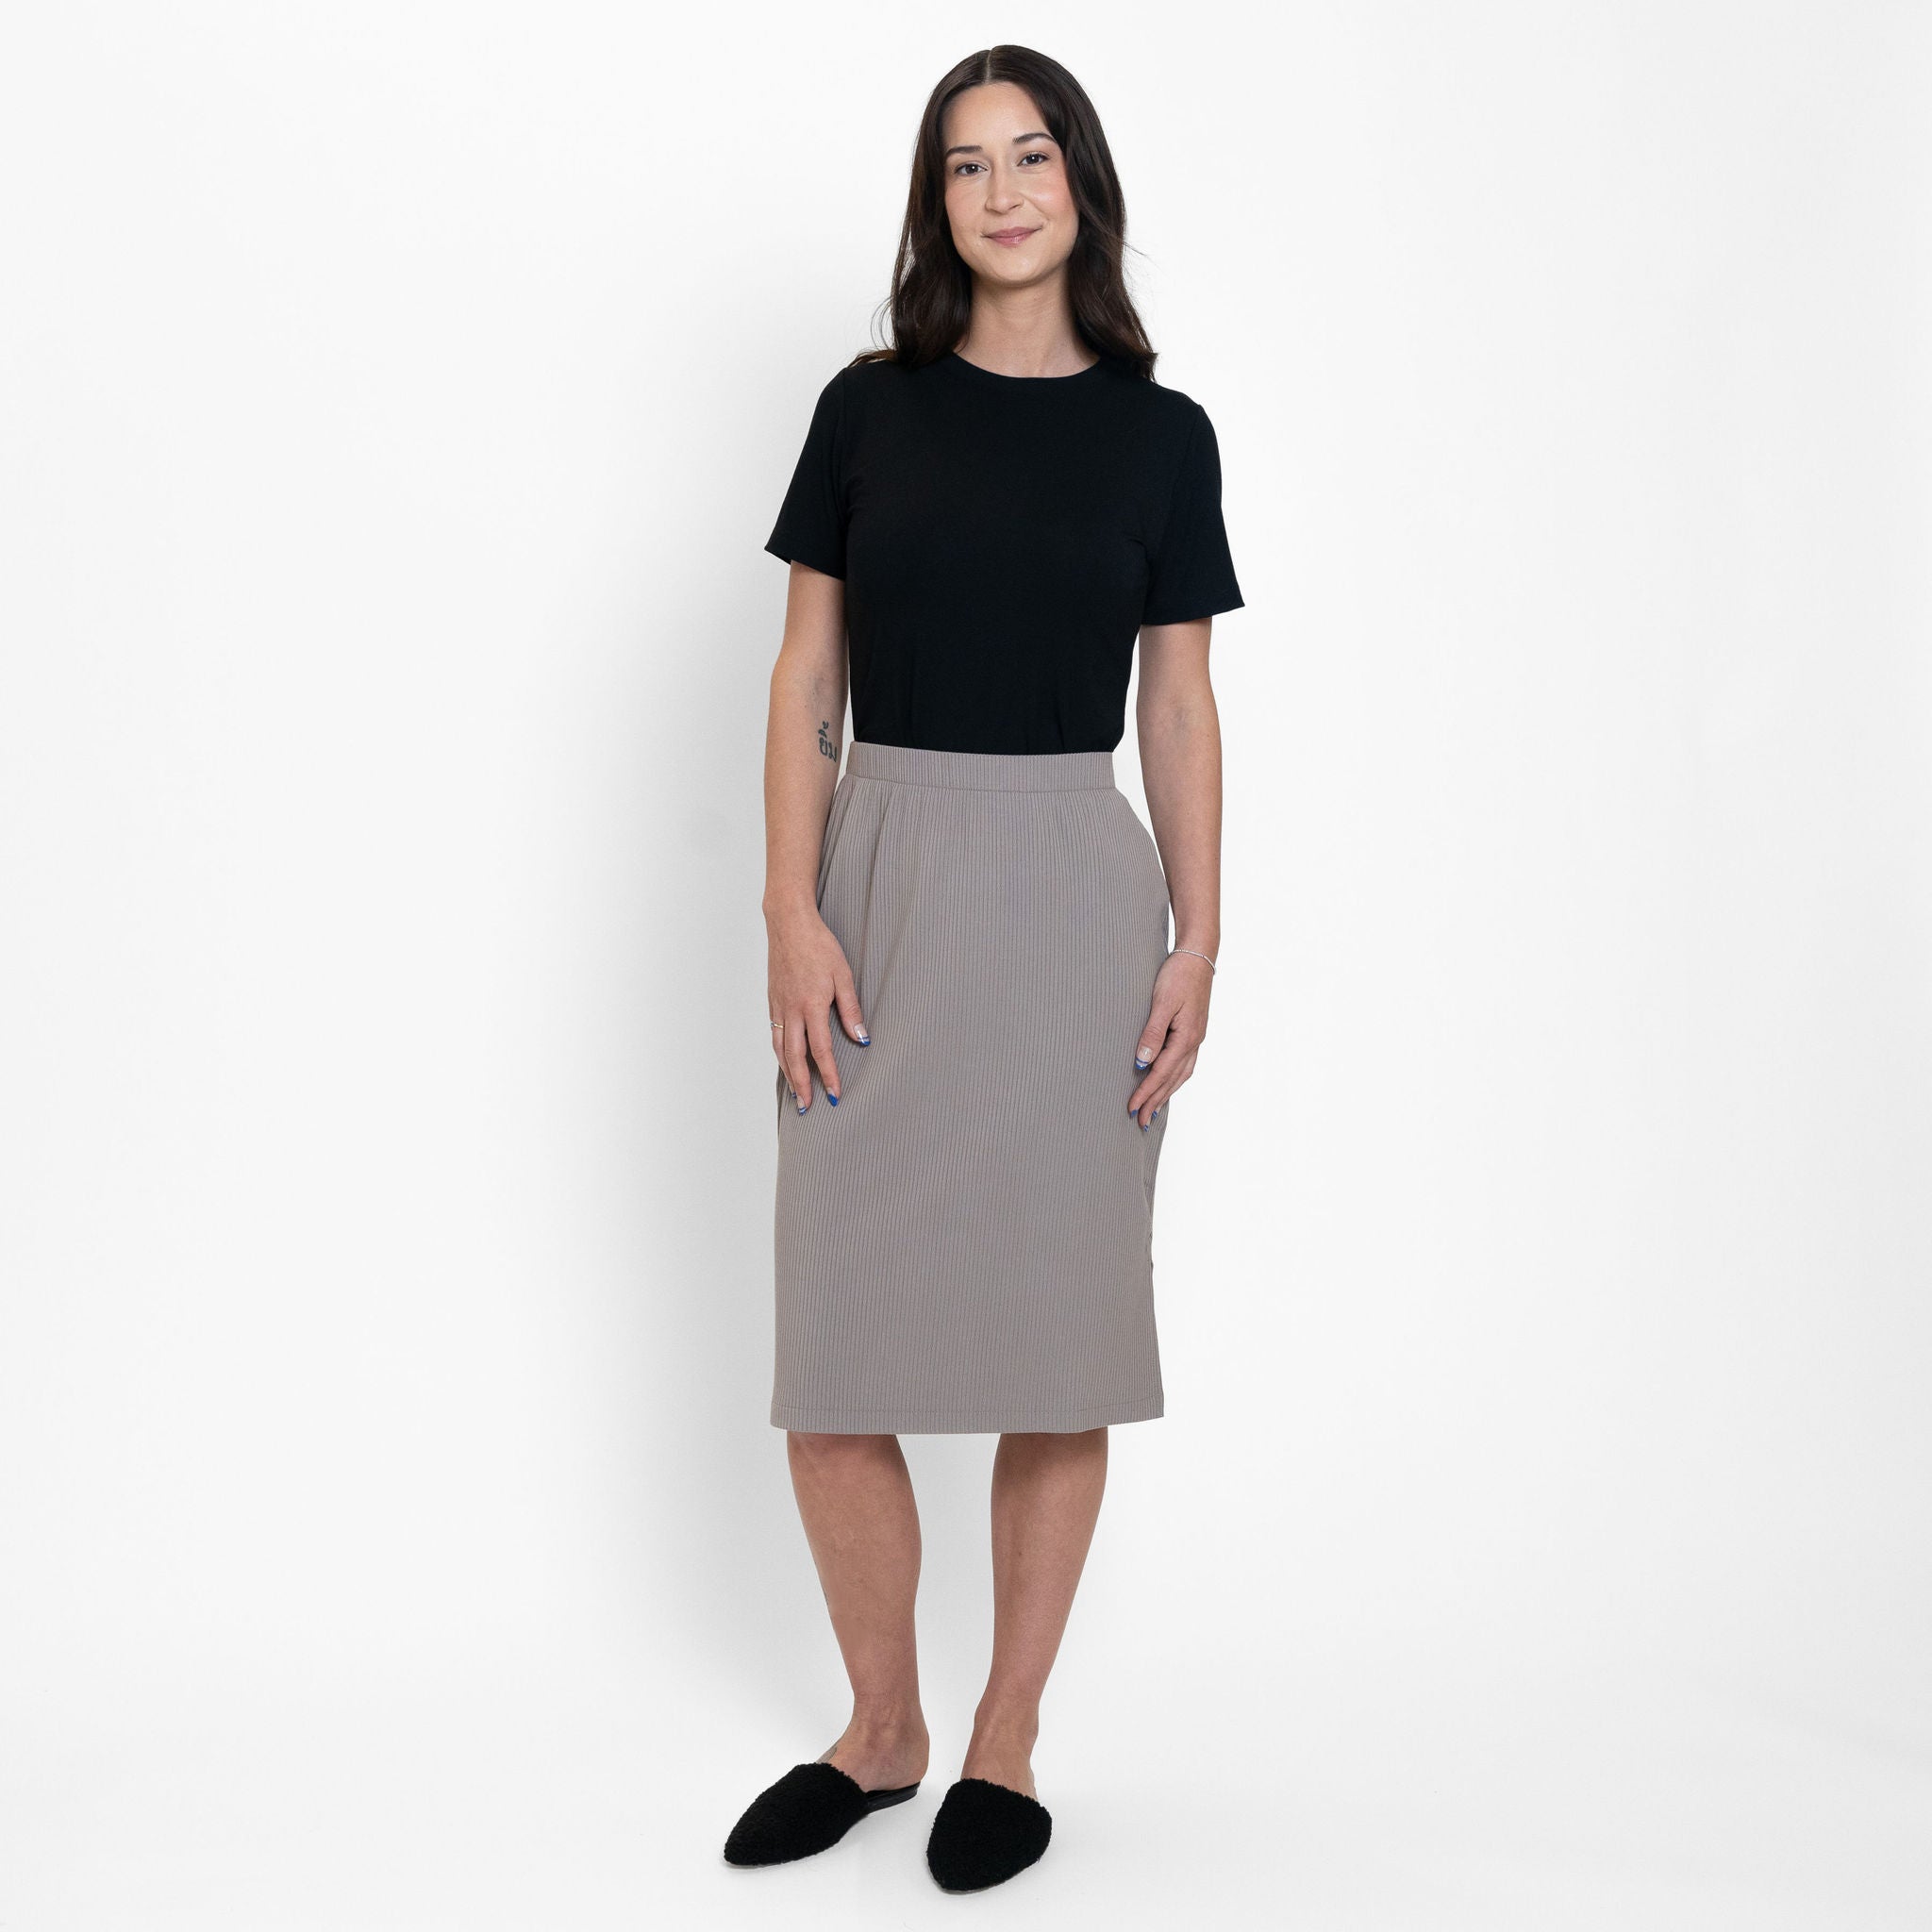 Woman wearing loose black crew neck t-shirt with beige knee length skirt